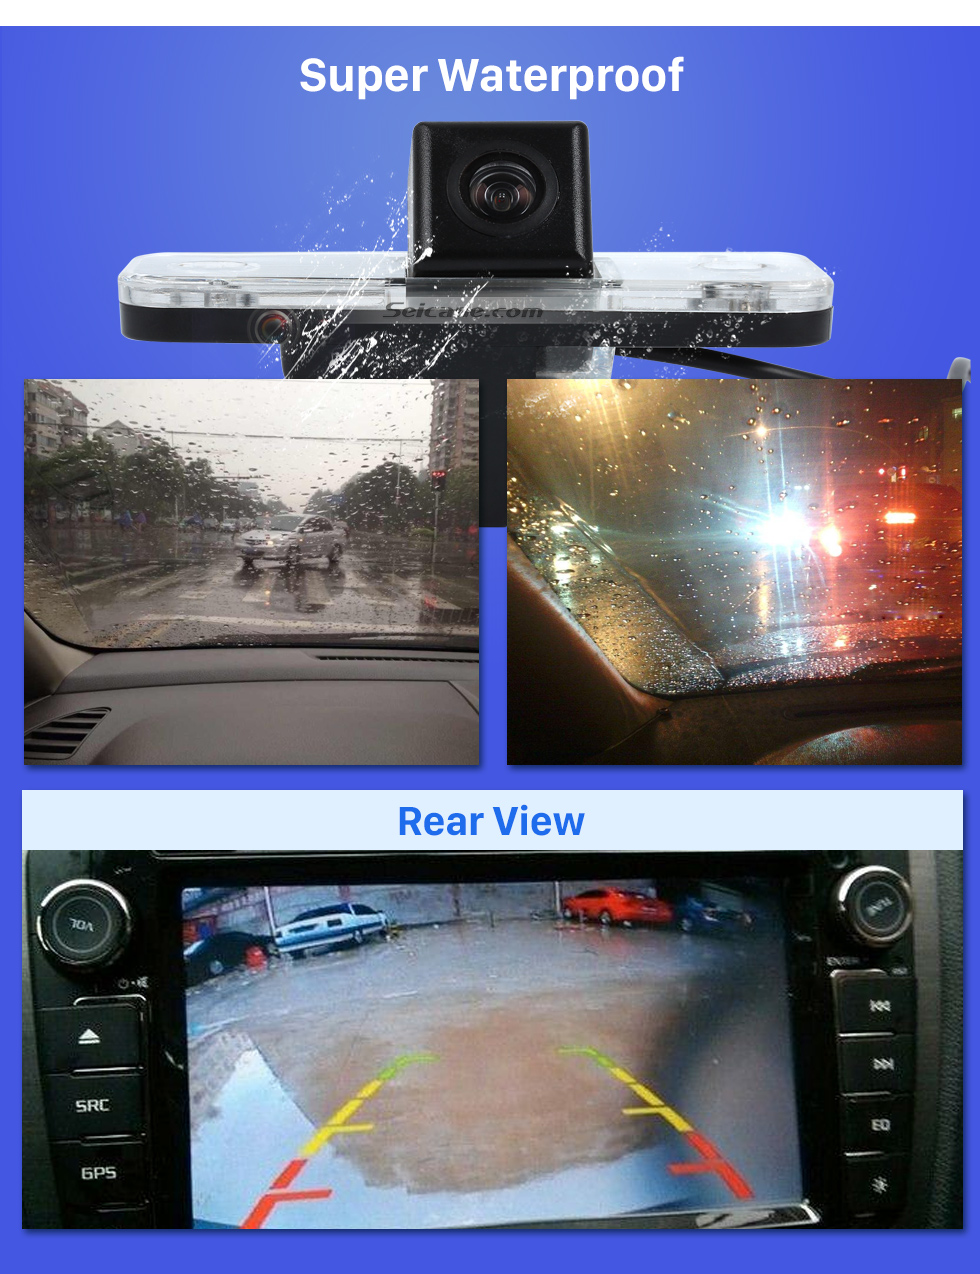 Seicane High Quality LED Backup Camera For 2006-2013 Hyundai Santa fe Waterproof and Night Vision with easy installation